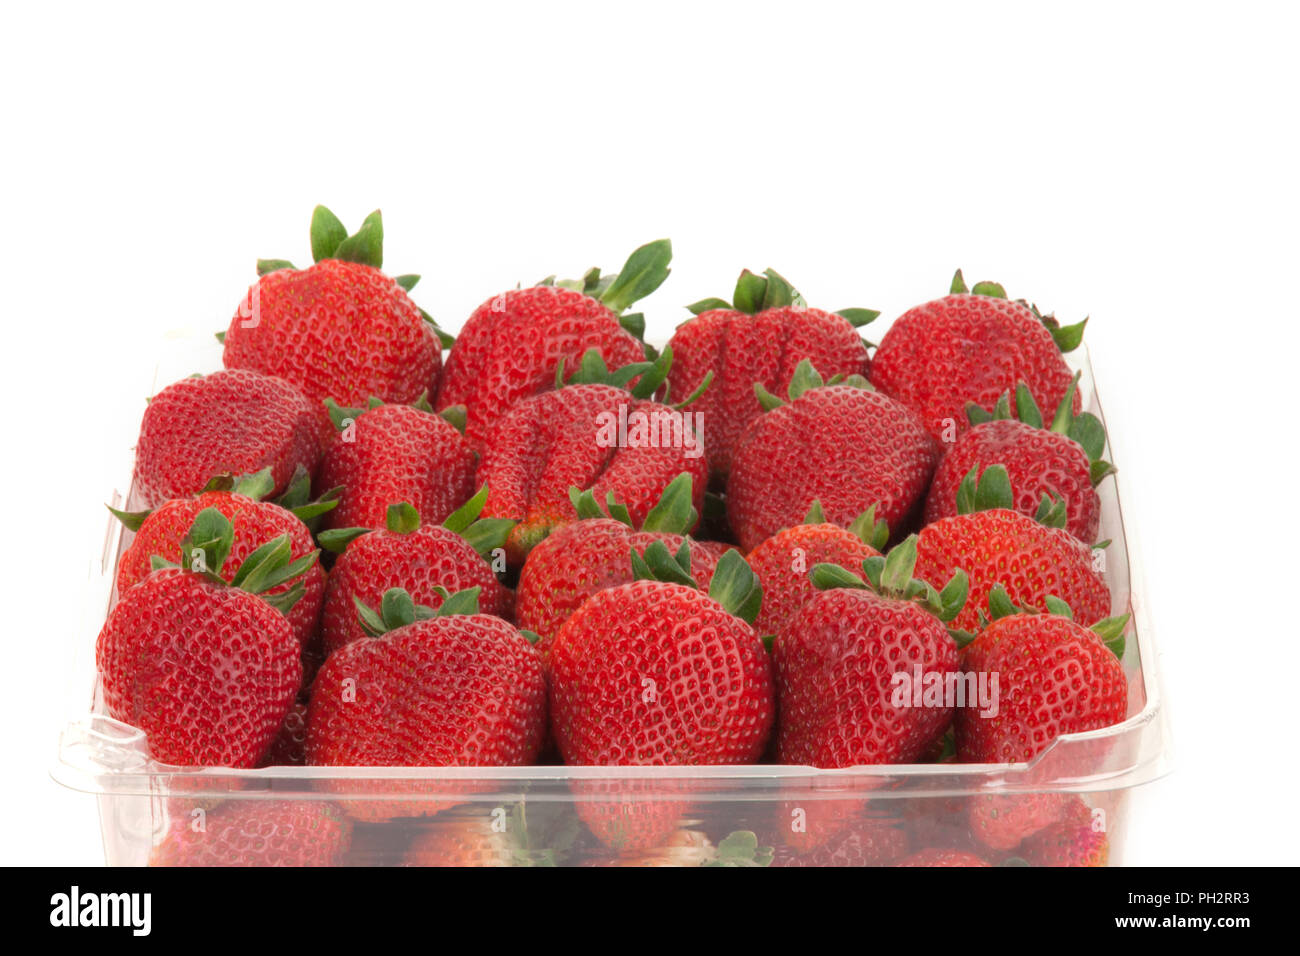 Red ripe strawberries all lined up in a container for the grocery store Stock Photo